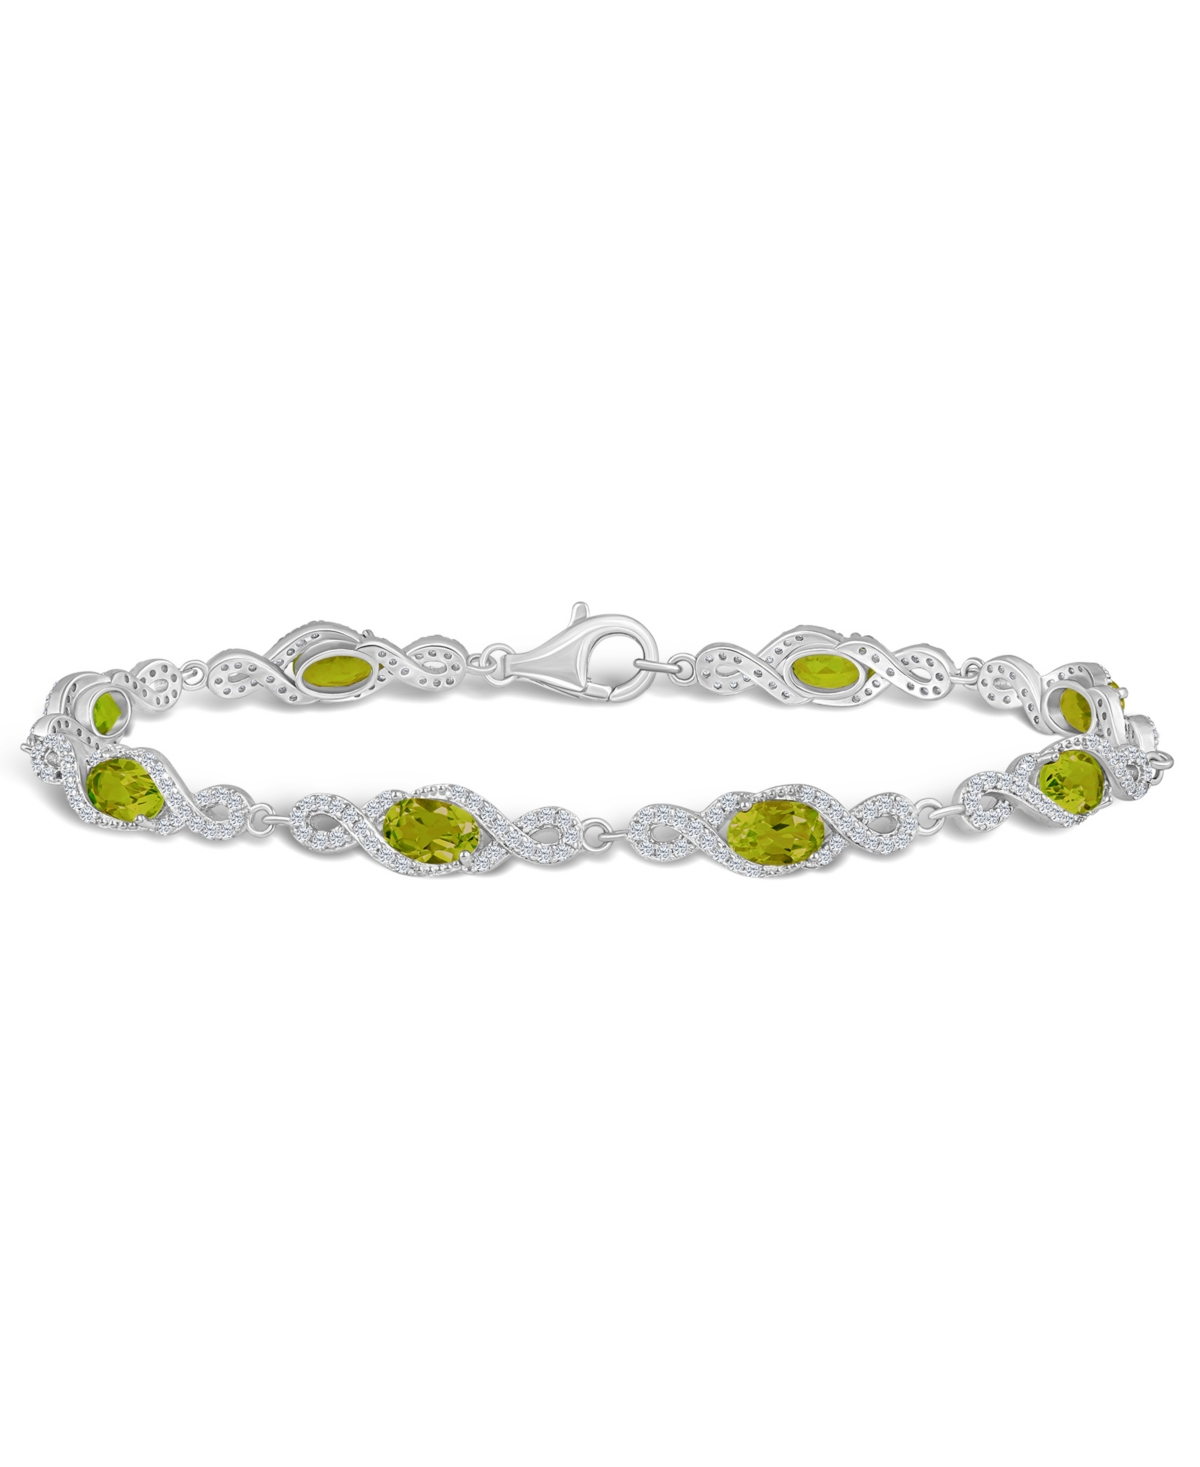 Macy's Peridot And White Topaz Bracelet (4-3/8 Ct. T.w And 2 Ct. T.w) In Sterling Silver